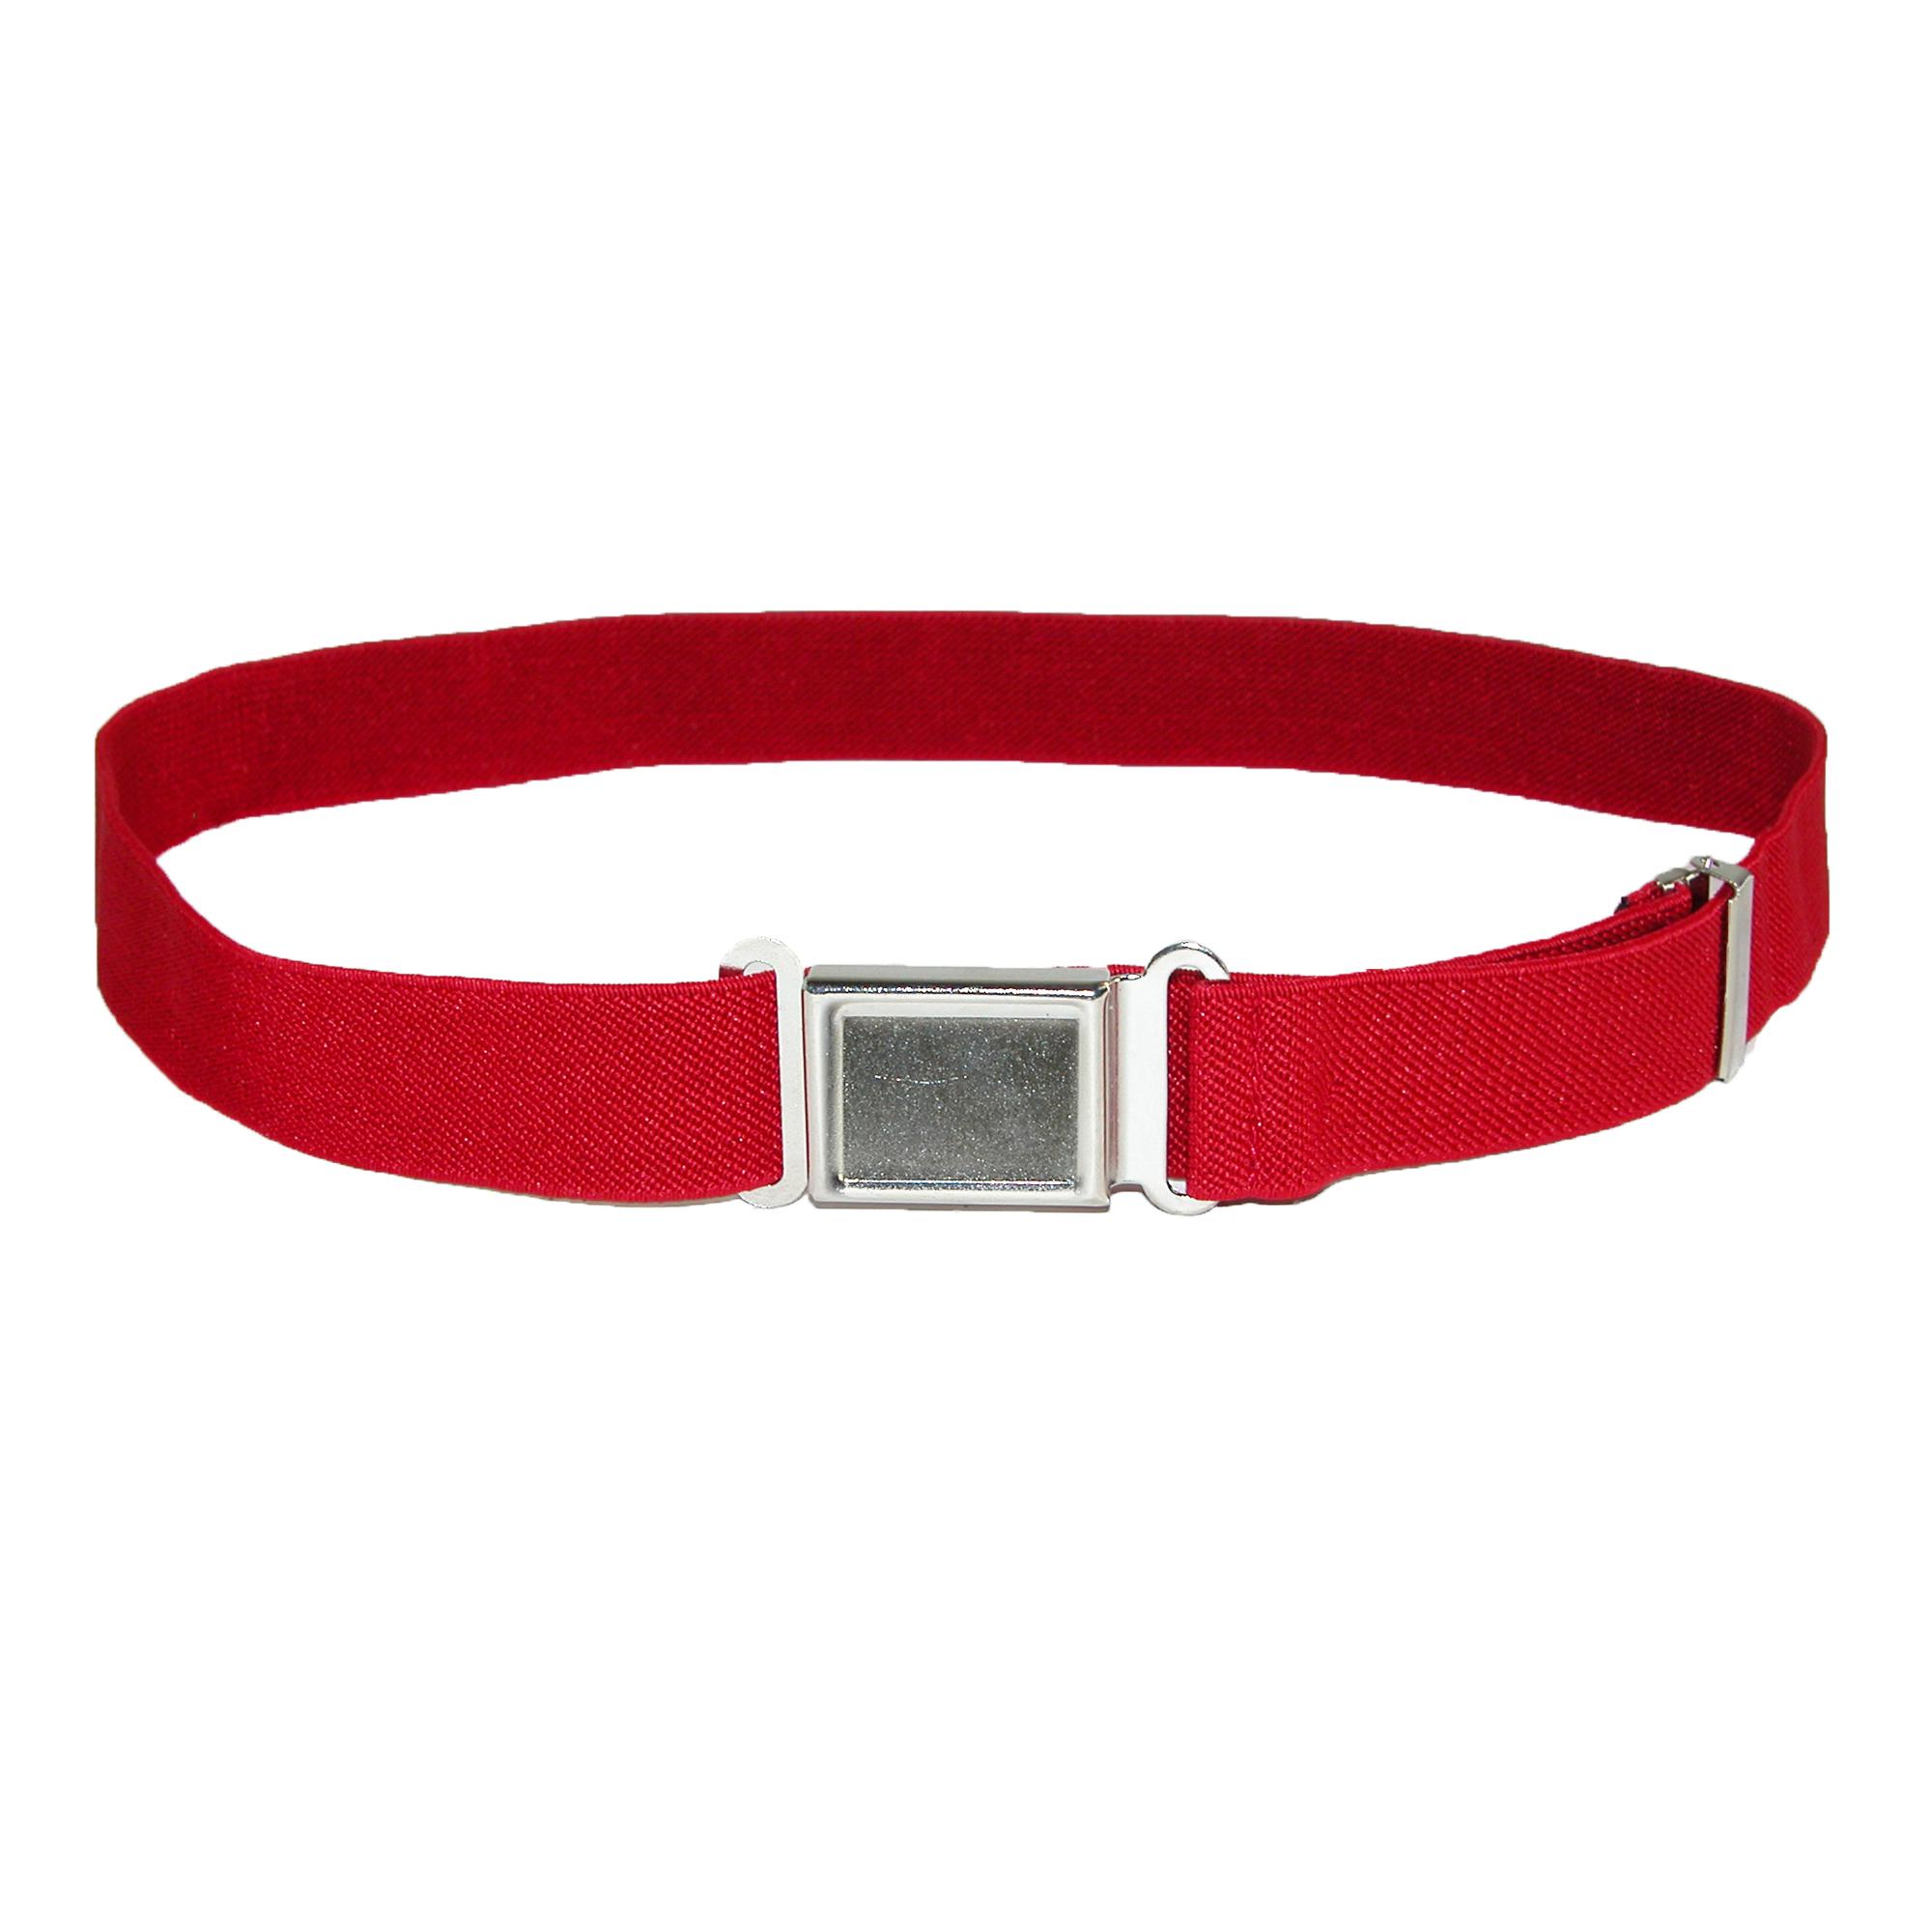 CTM Kids' Elastic Stretch Belt with Magnetic Buckle